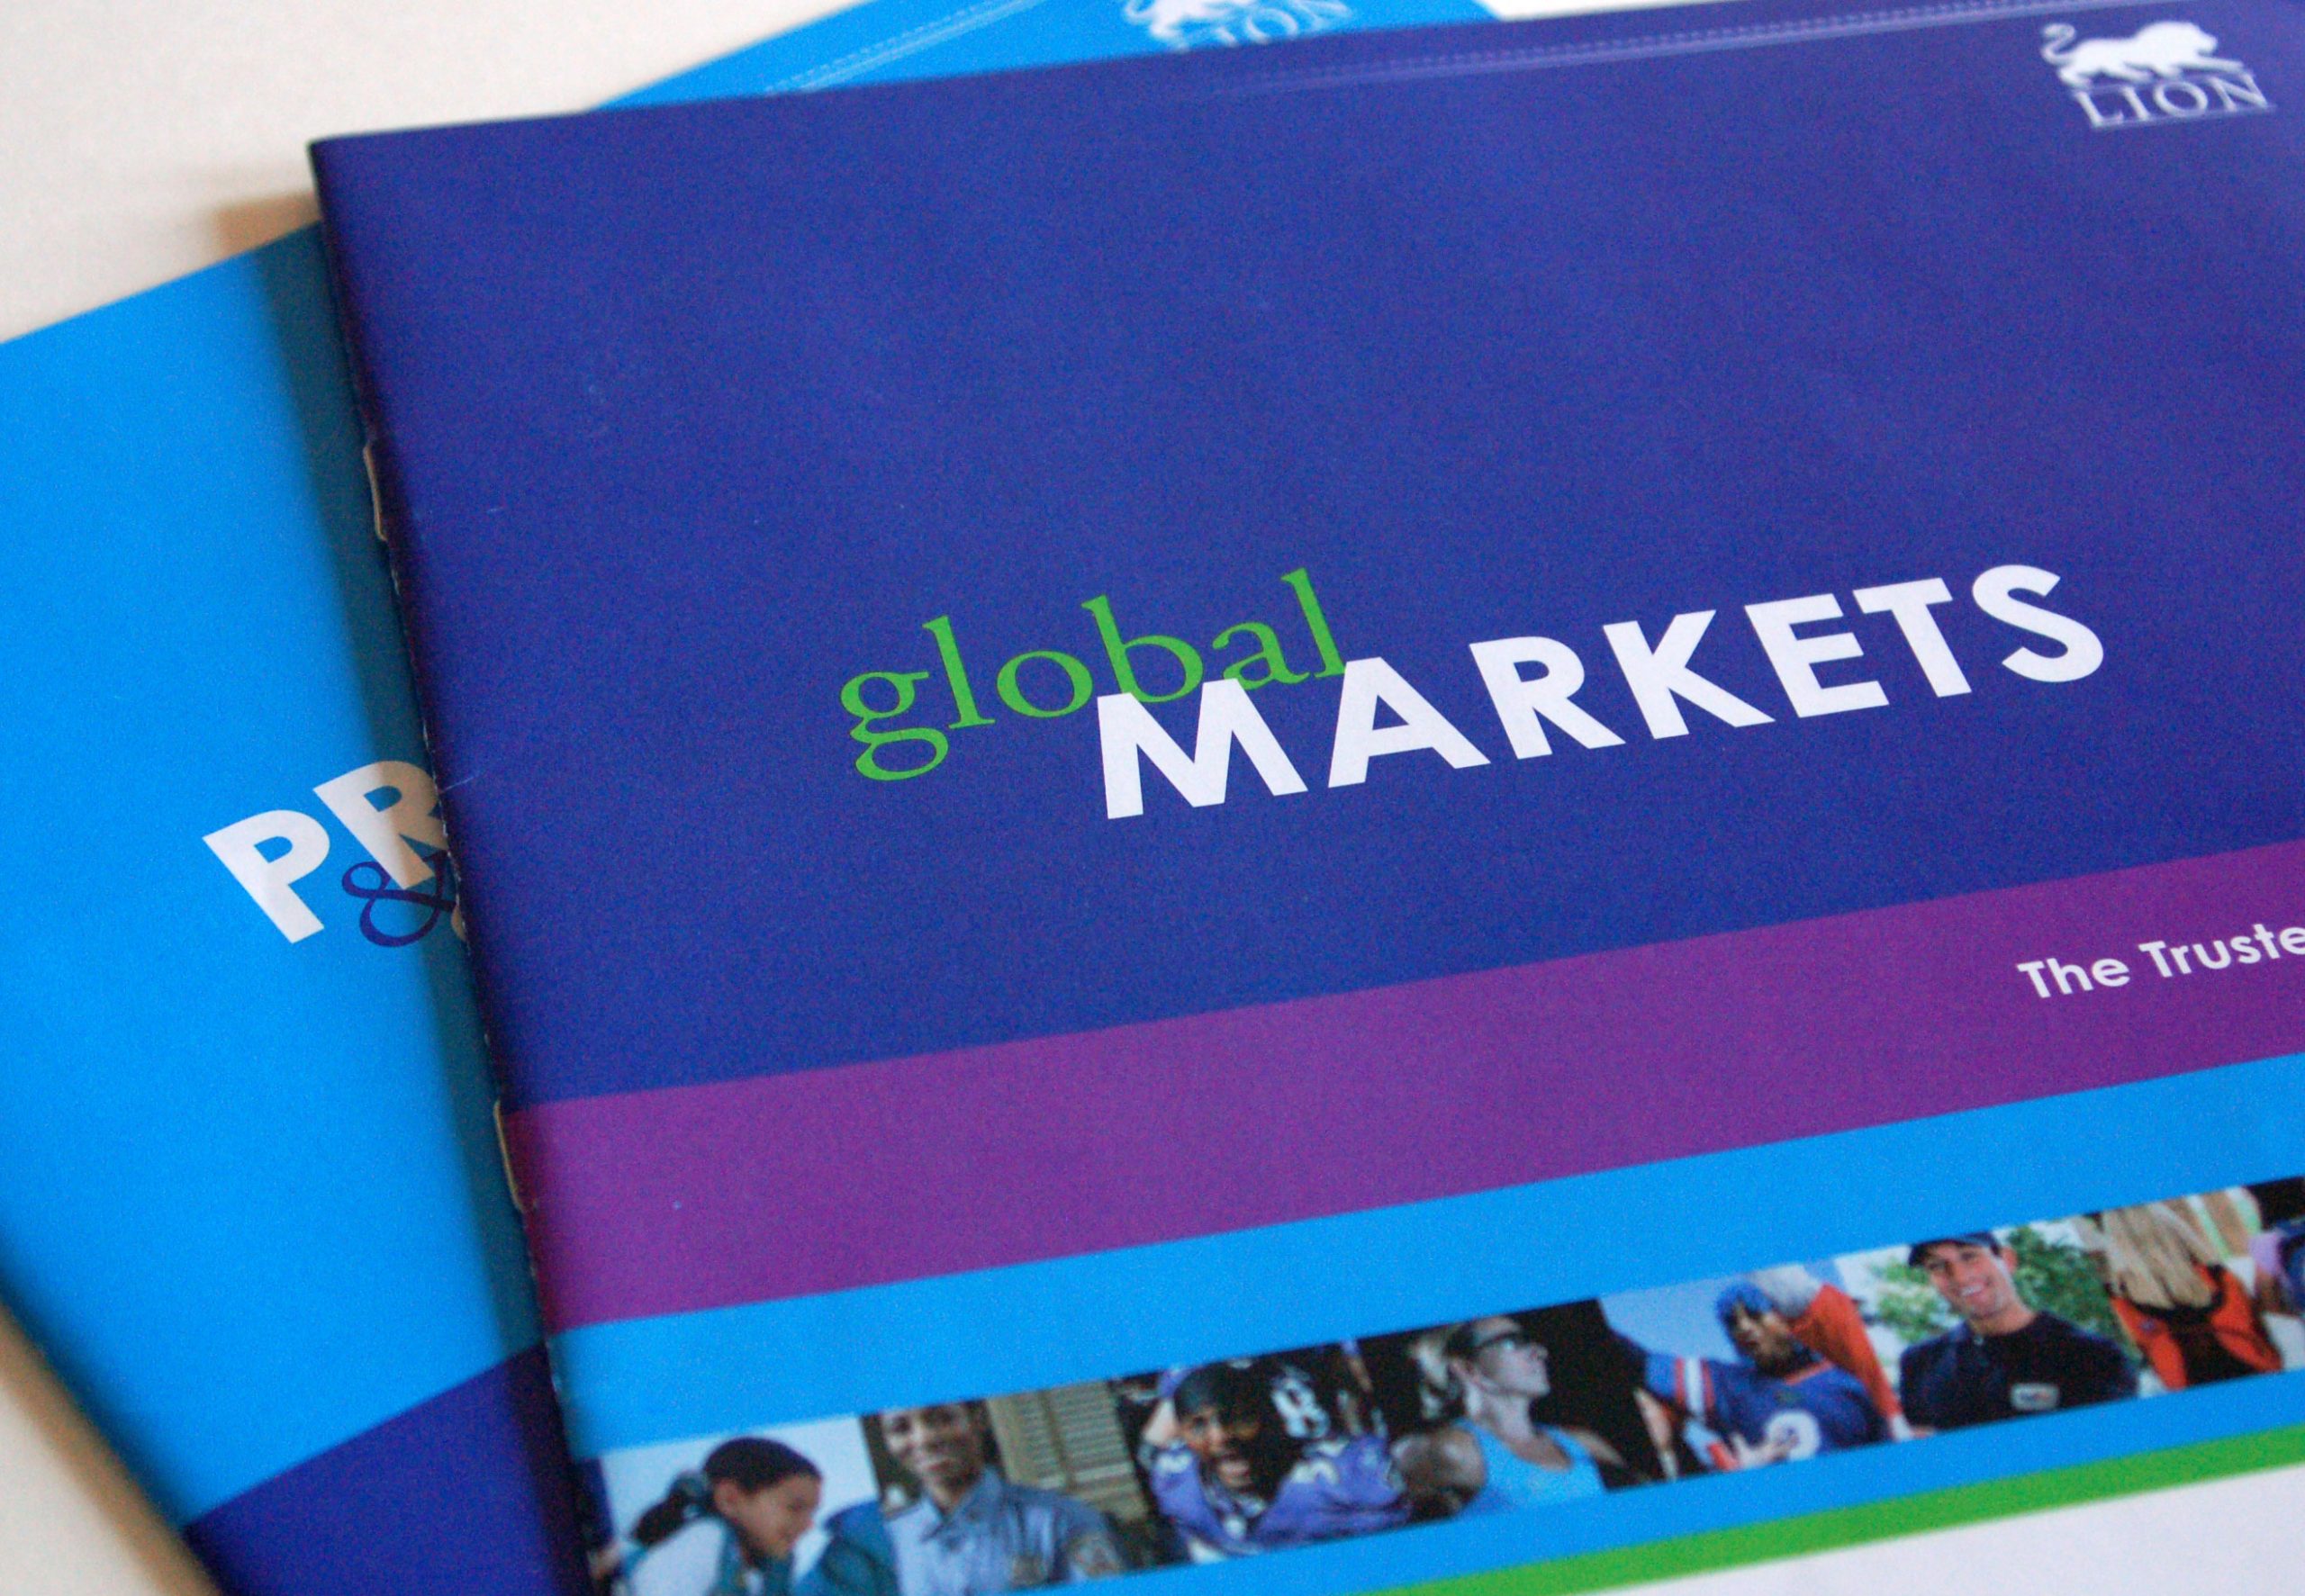 Lion Brothers Global Markets booklet cover photo